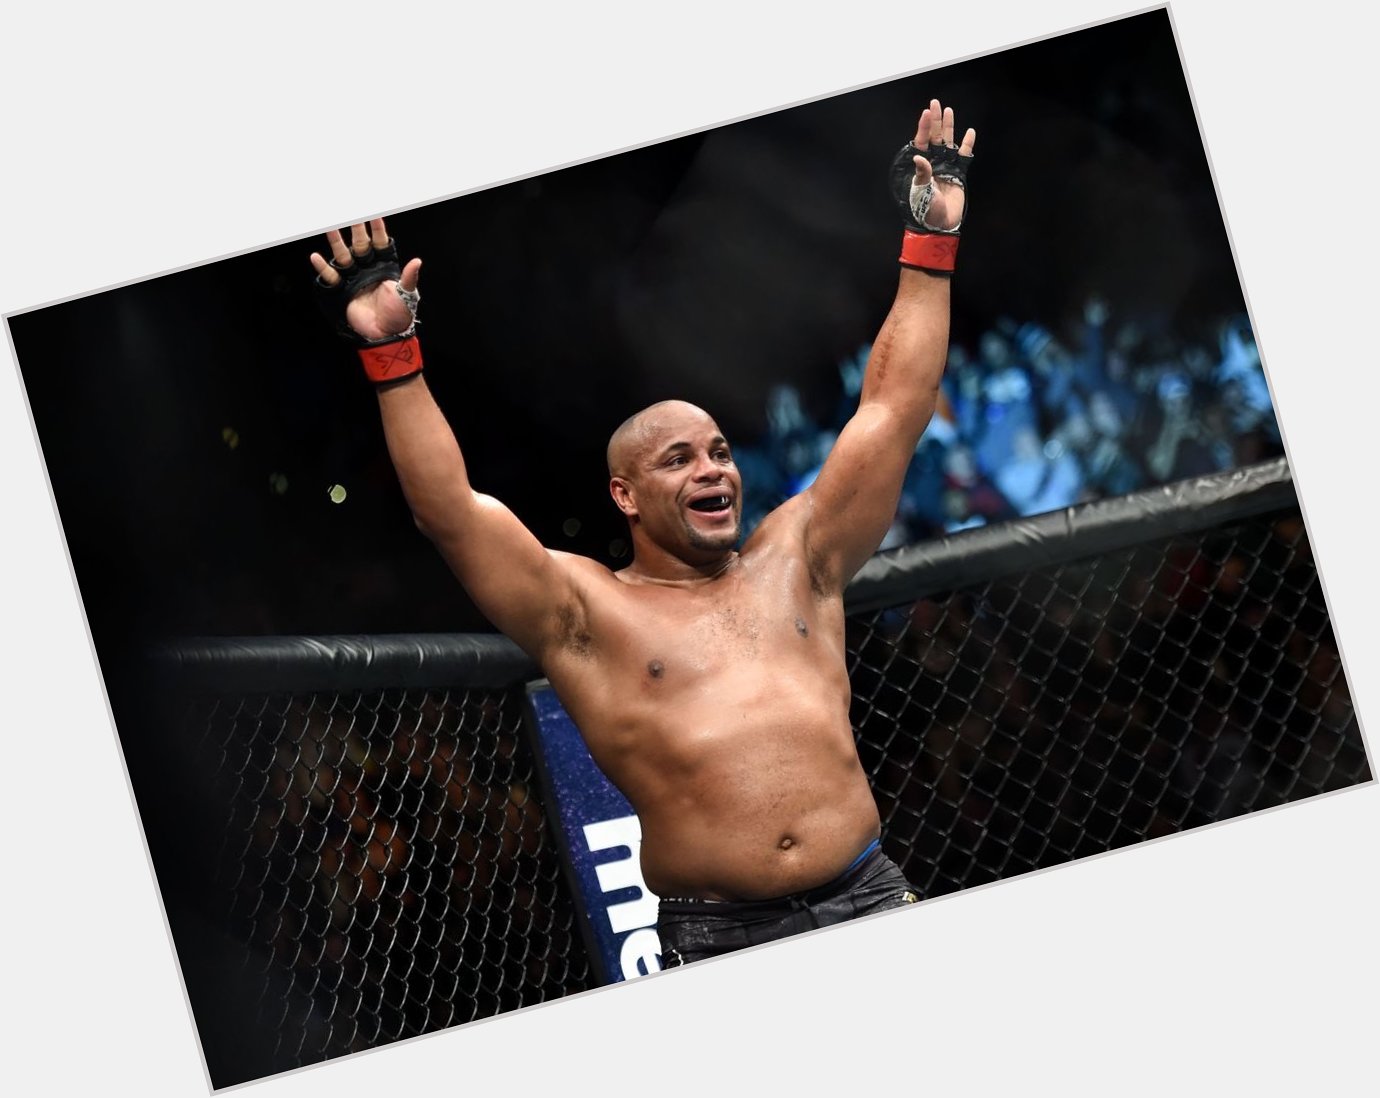   Happy birthday to one of the greatest to ever do it.

Happy 41st birthday to Daniel Cormier. 